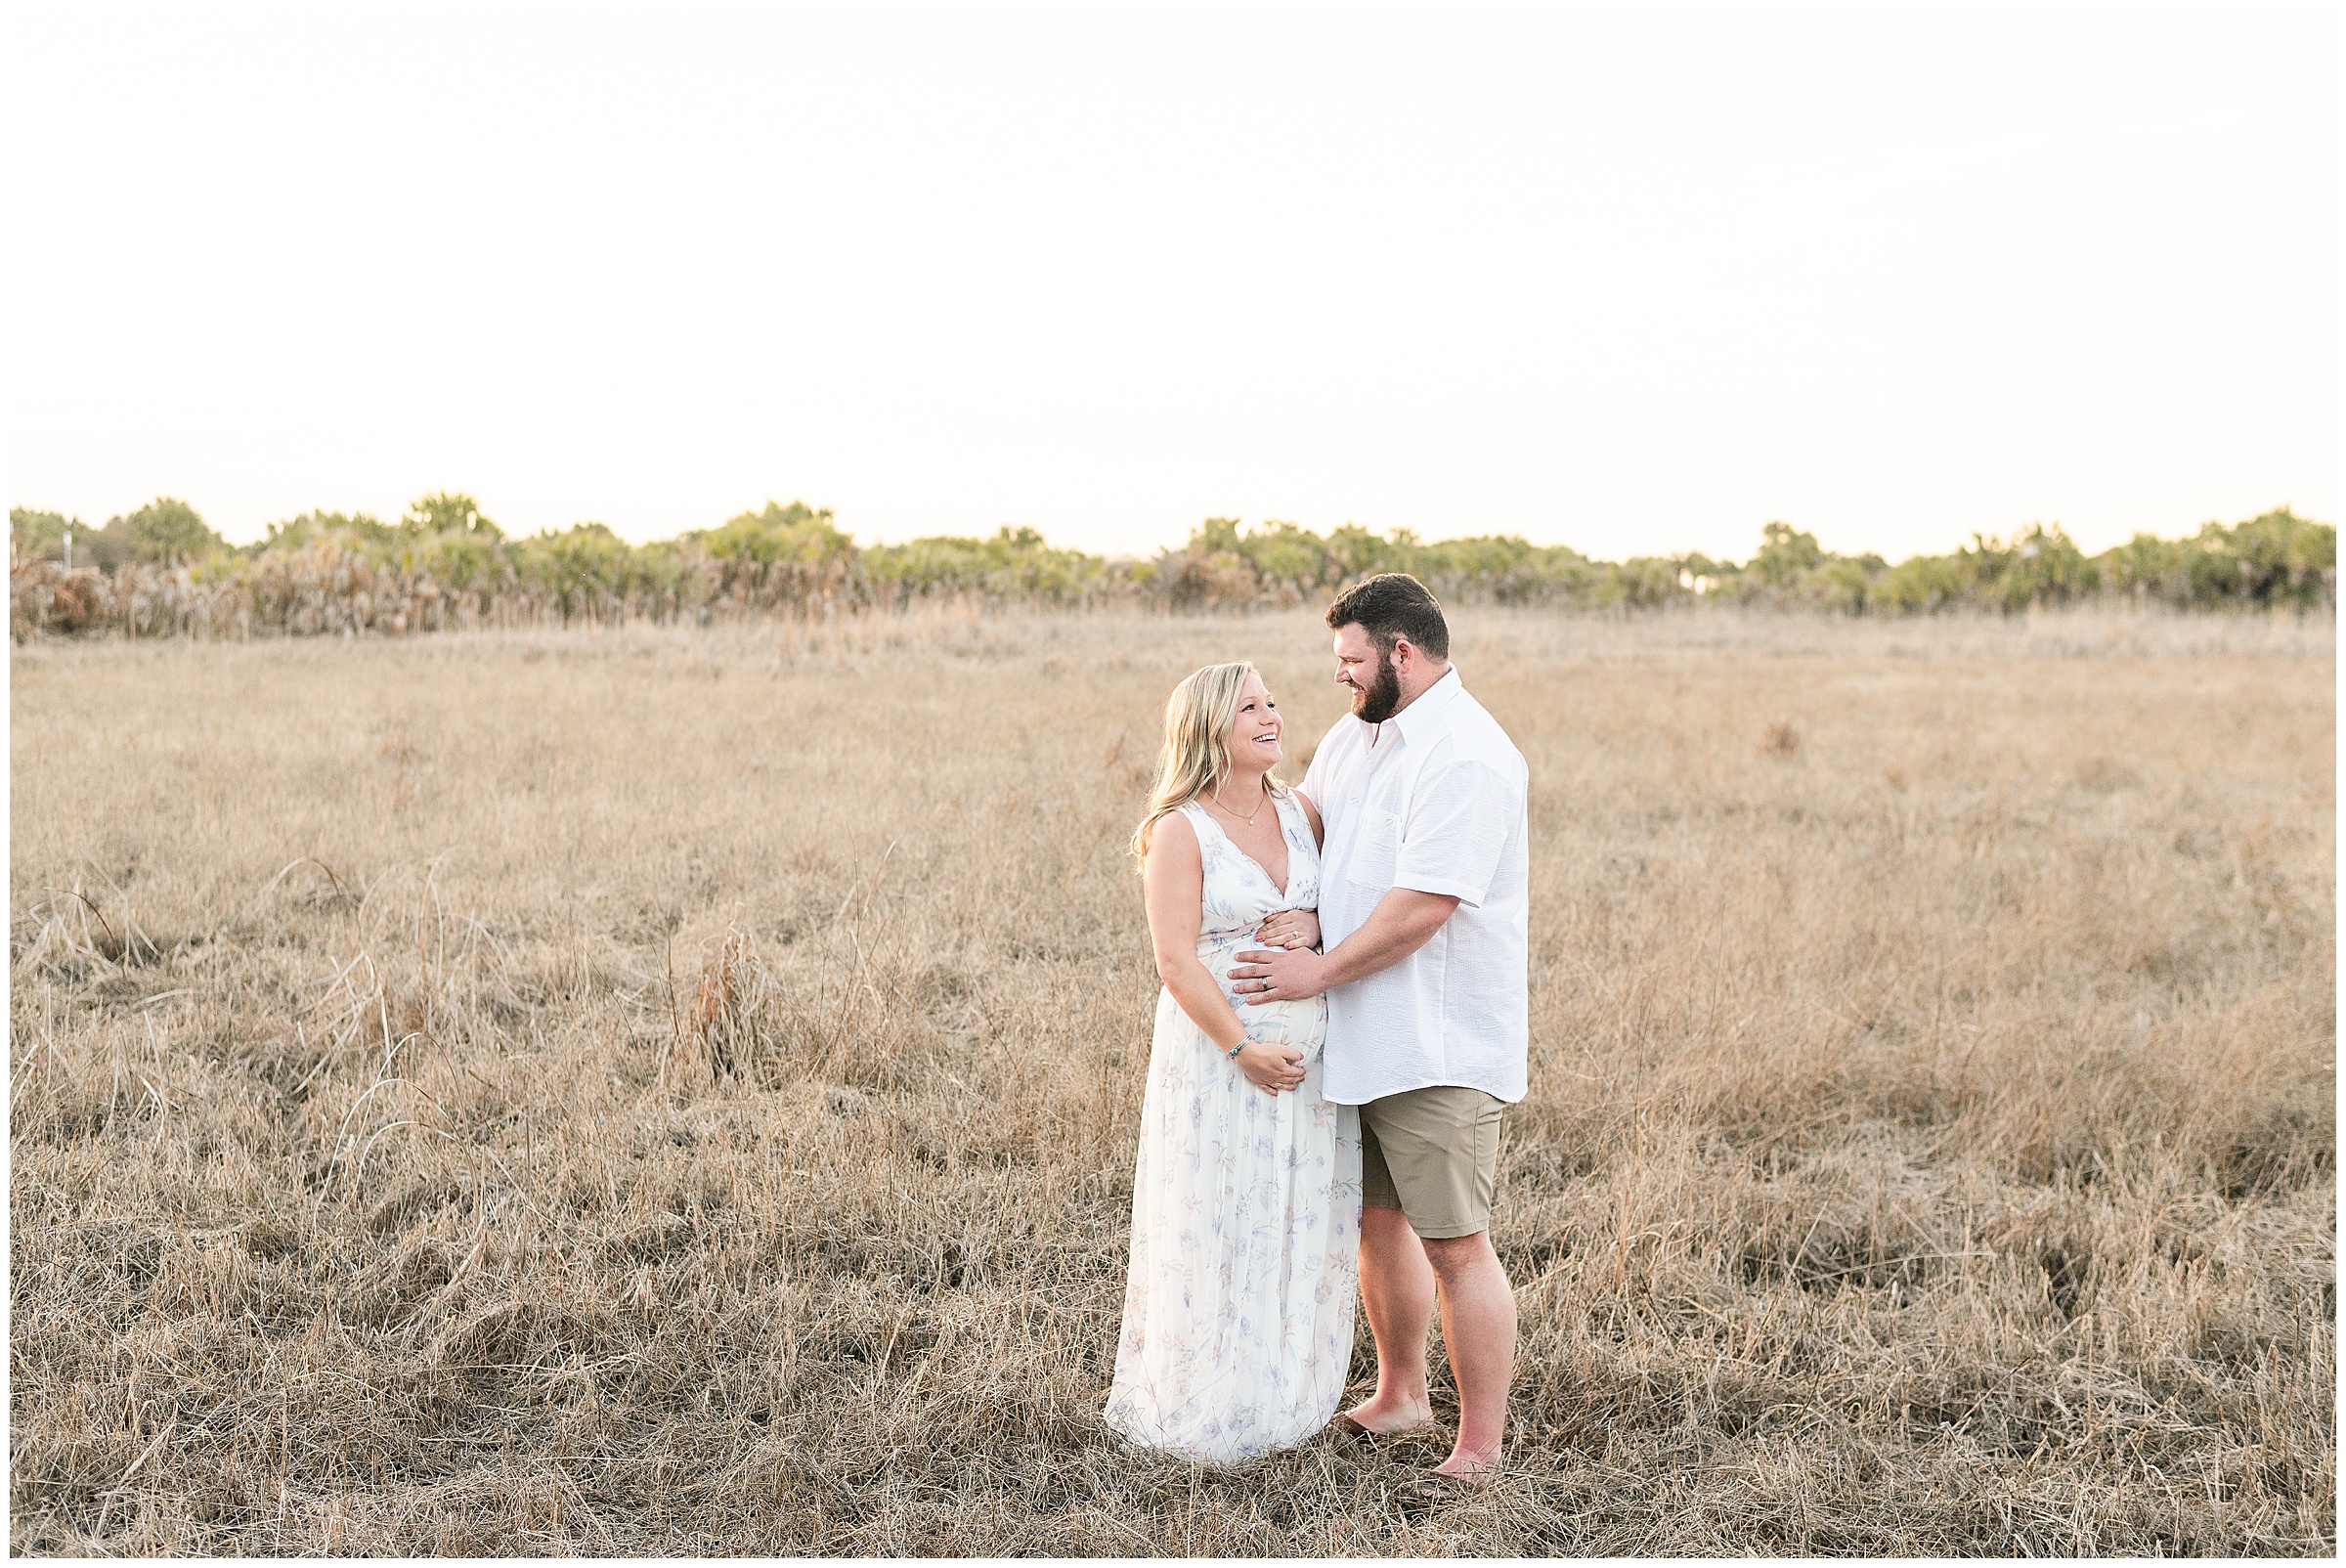 Maternity photos in a grassy field at Honeymoon Island State Park in Florida. 